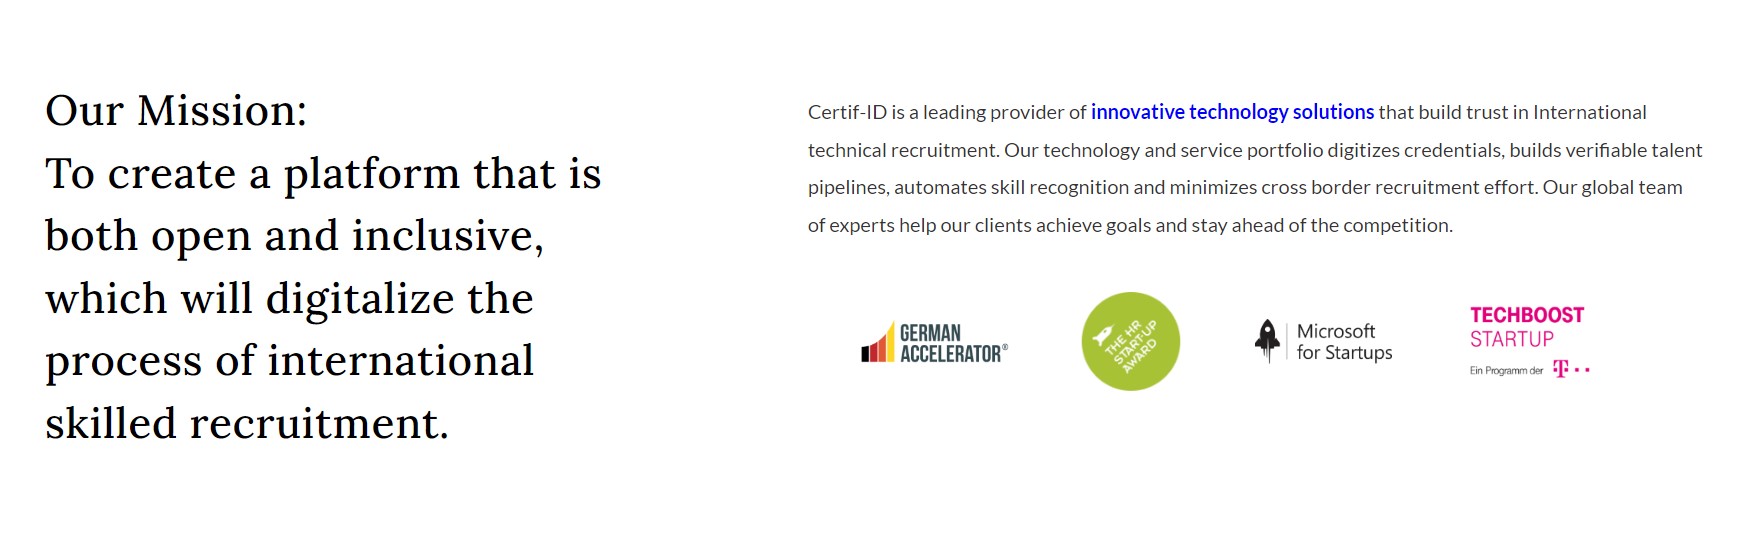 Certif-ID About